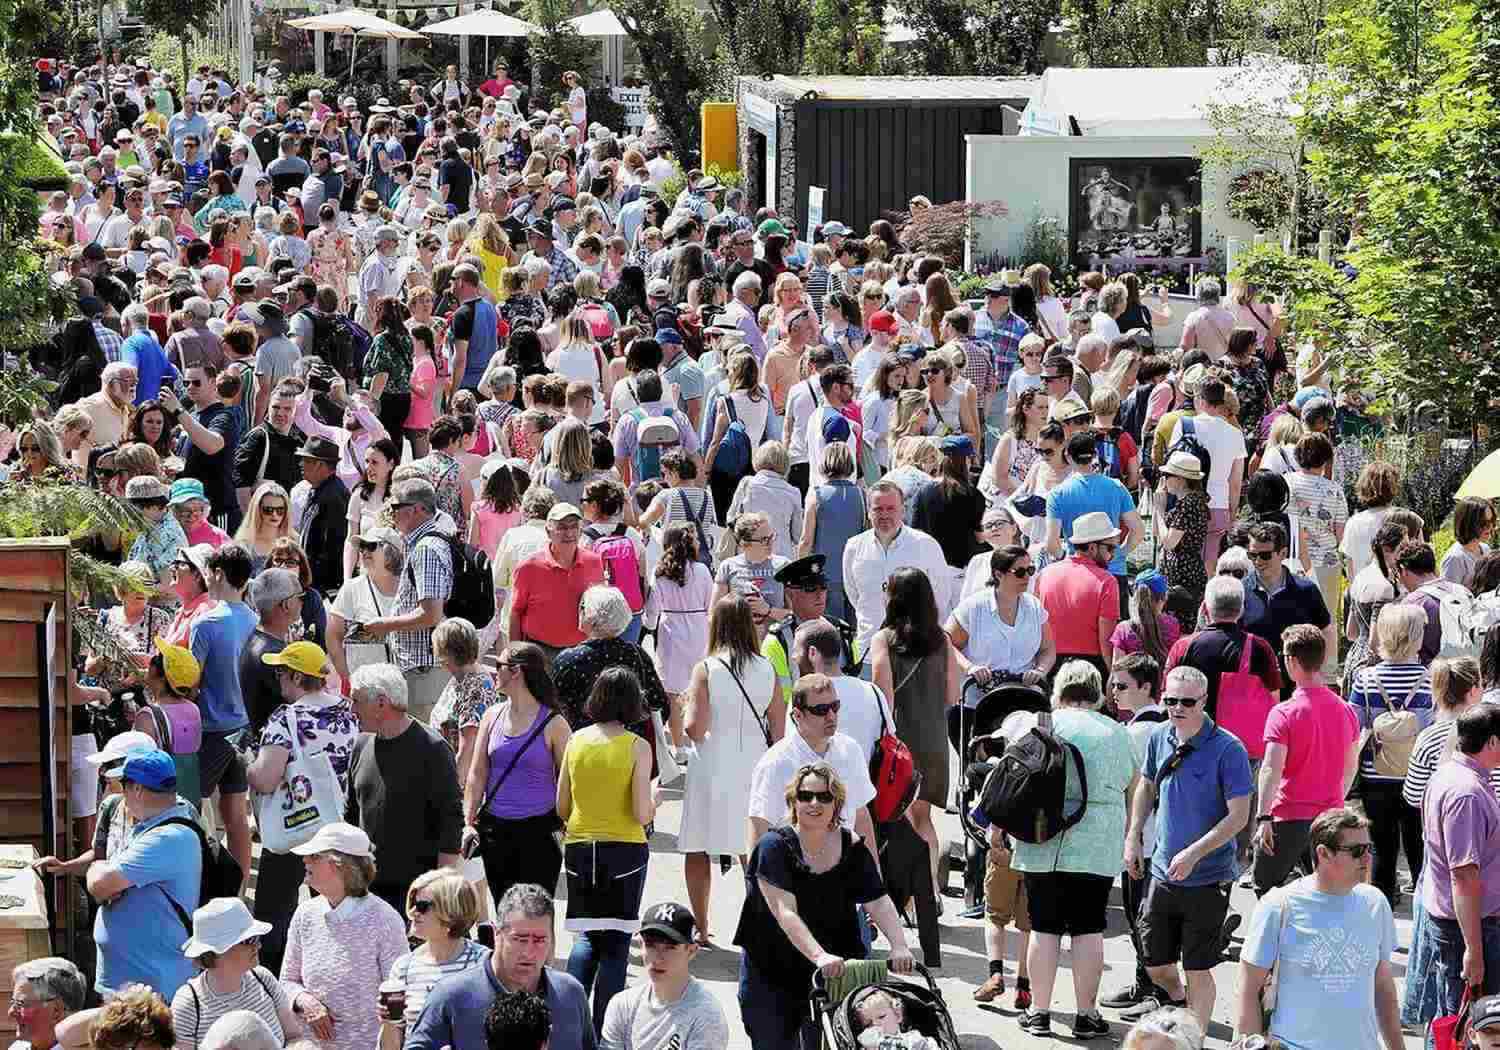 Some 119,000 people attended Bord Bia’s Bloom festival in Dublin’s Phoenix Park over the June bank holiday weekend.